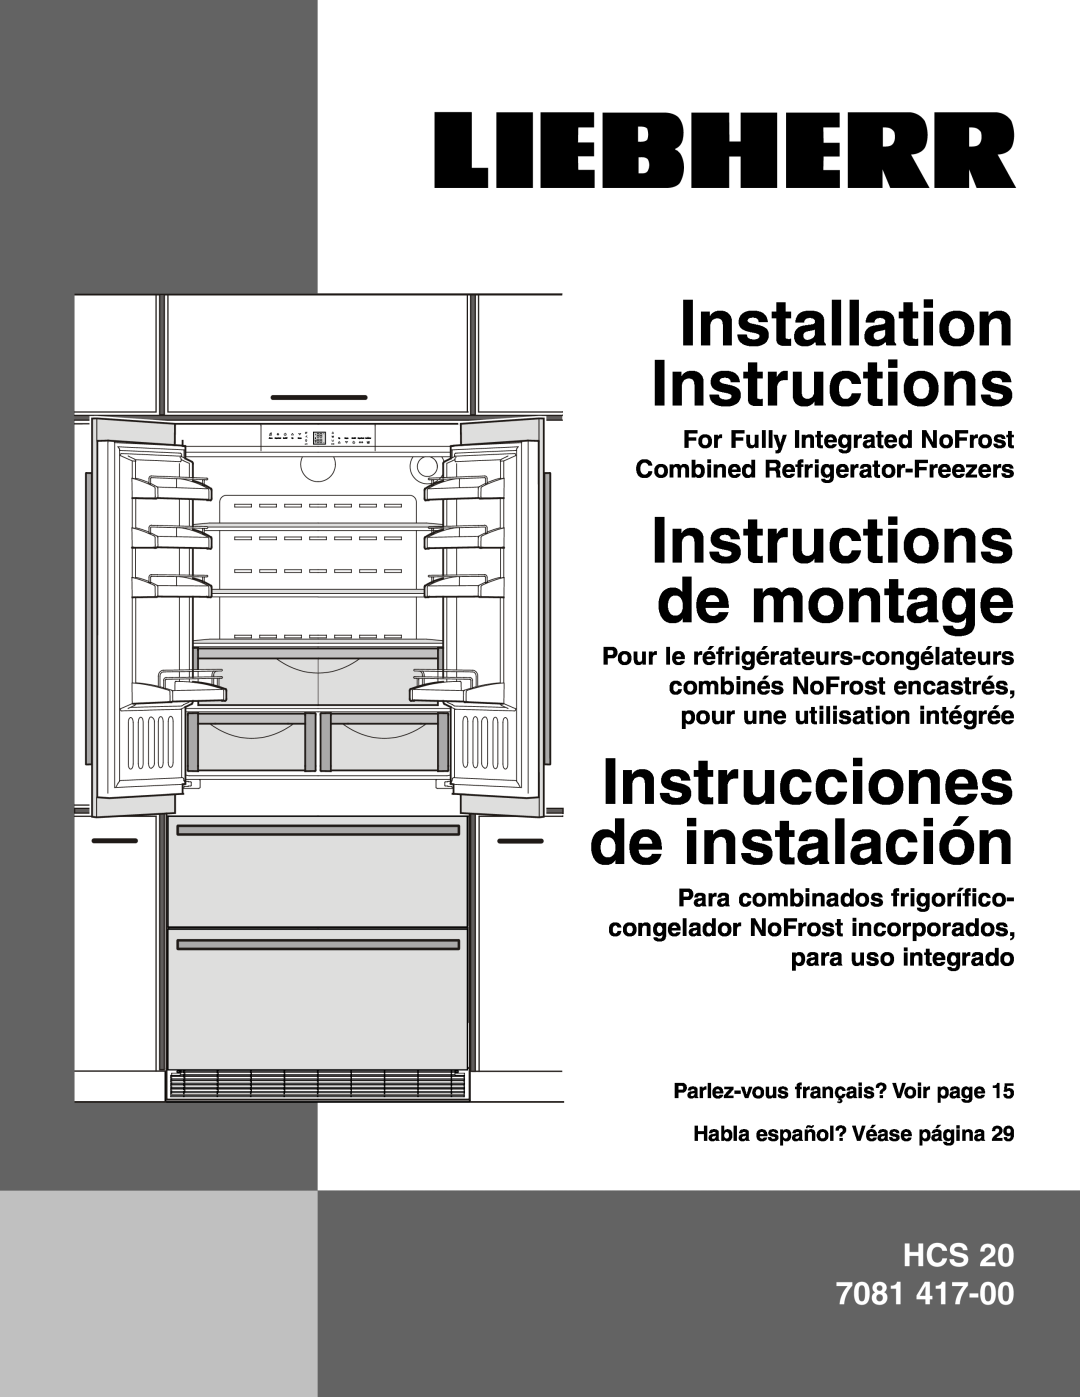 Liebherr HCS 20 installation instructions For Fully Integrated NoFrost Combined Refrigerator-Freezers, Hcs 